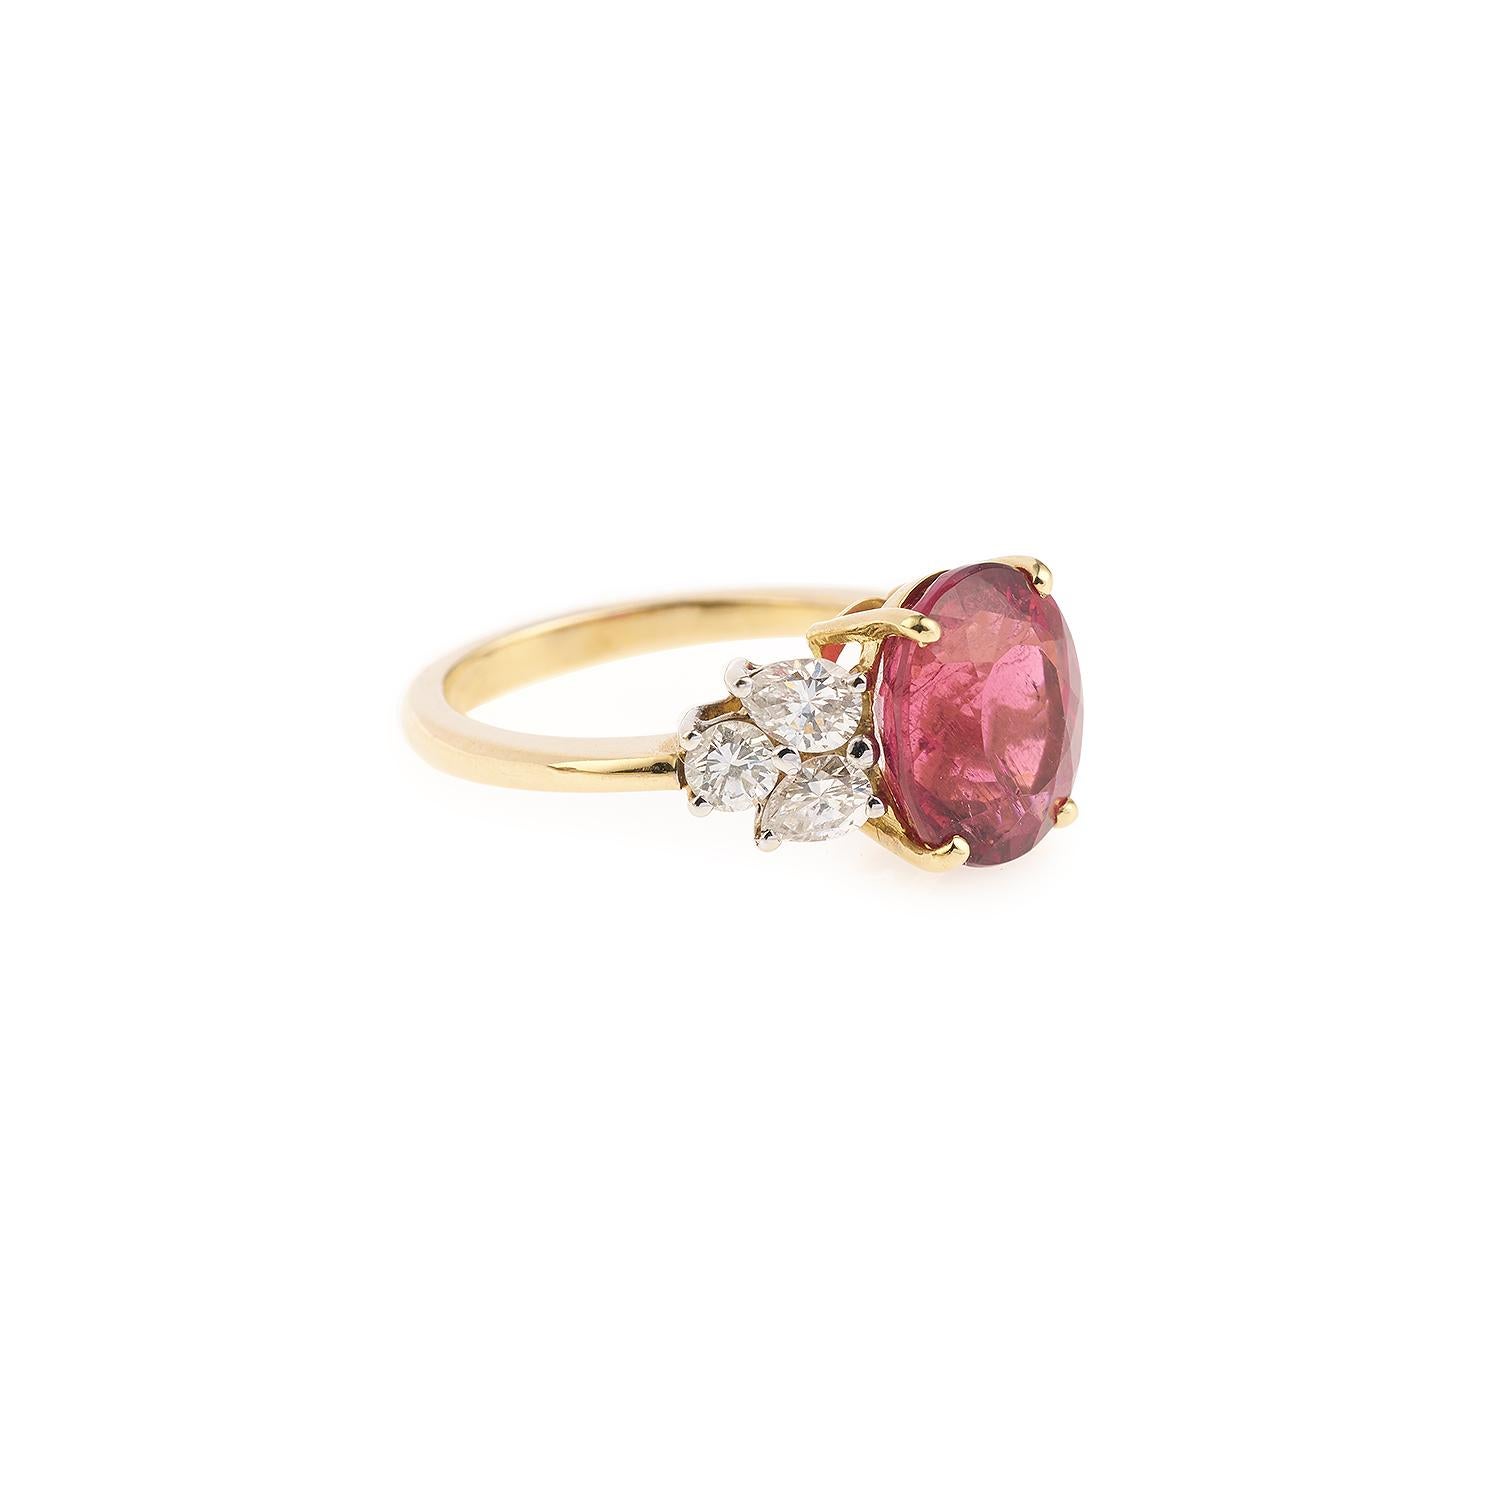 Beautiful ring set with an oval rubelite of 4 carats .

The central stone is surrounded by 6 brilliant and pear cut diamonds. 

Total weight of the diamonds : approx 0.70 carat.

18K yellow gold, 750 / 000th (eagle's head hallmark).

Size of the